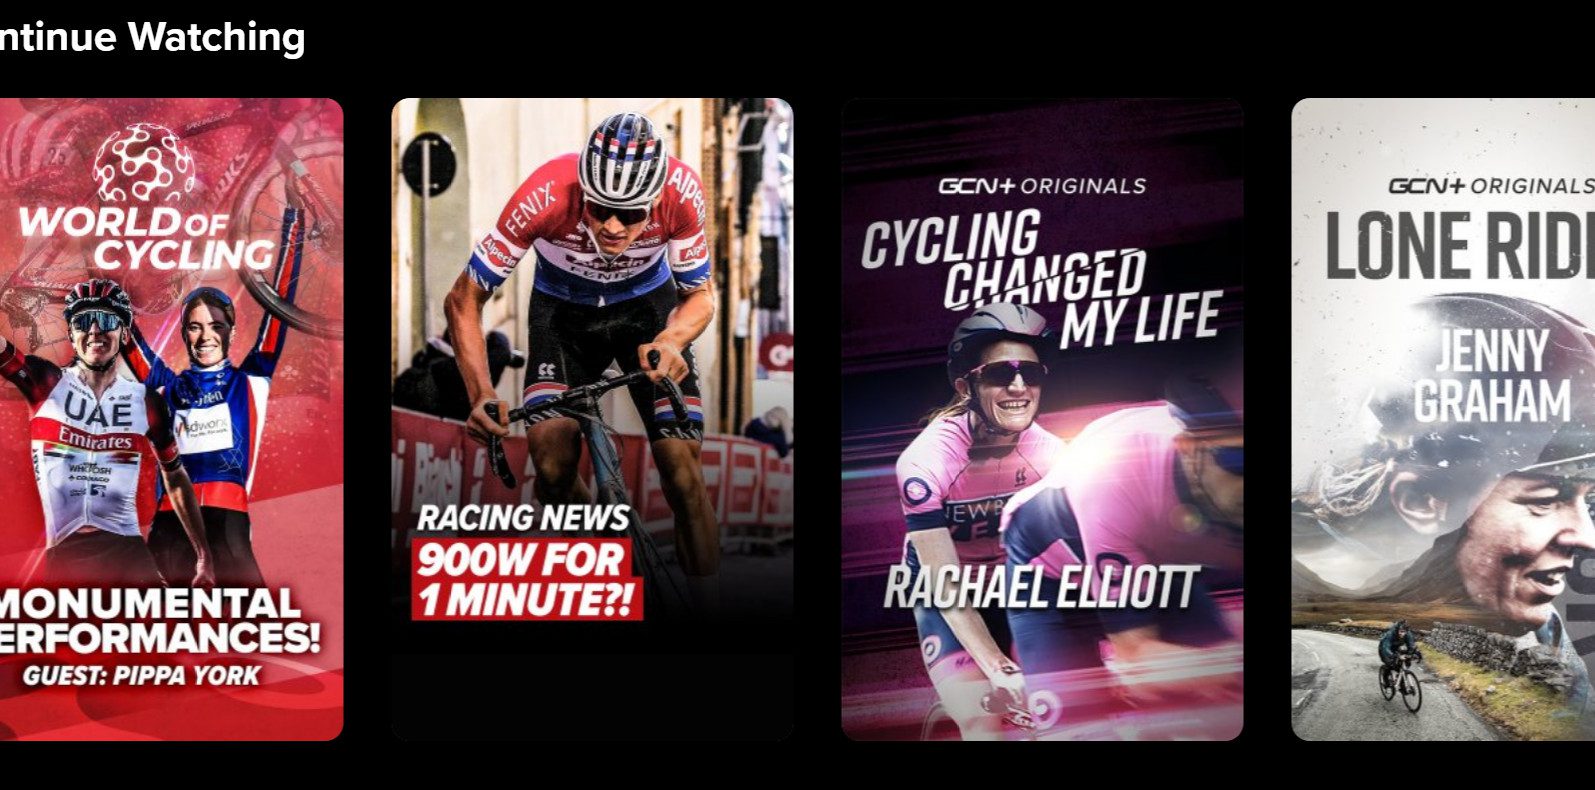 One-stop cycling streaming with GCN+